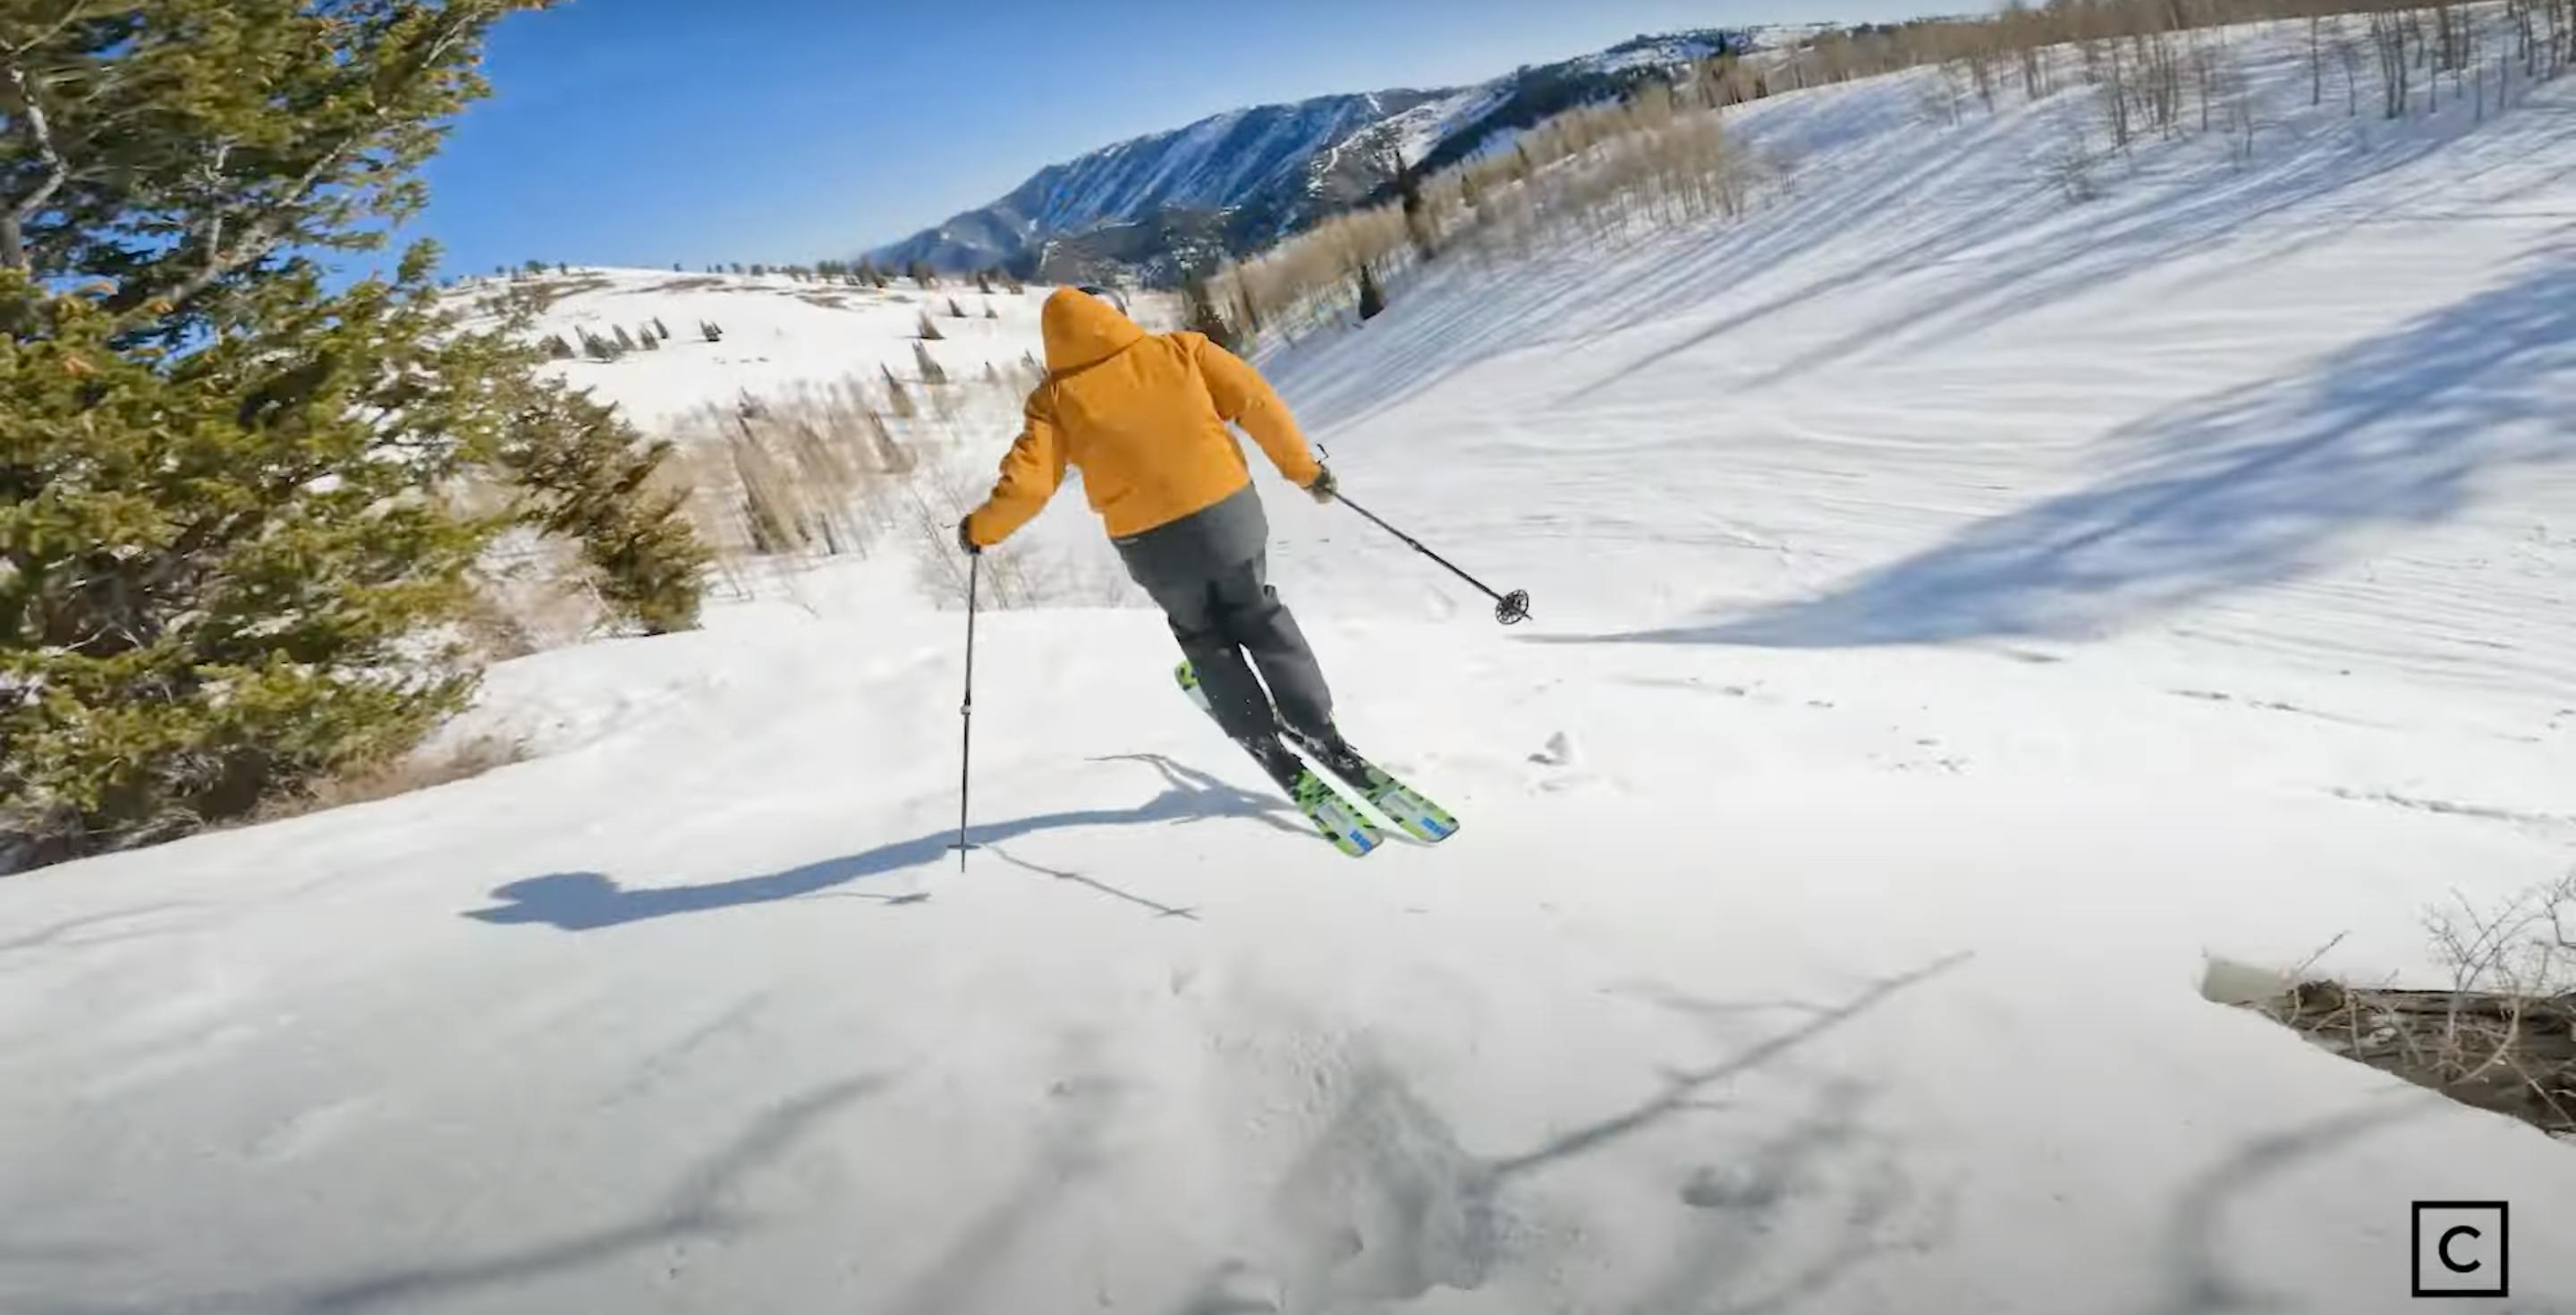 A skier jumping off a jump on skis. 